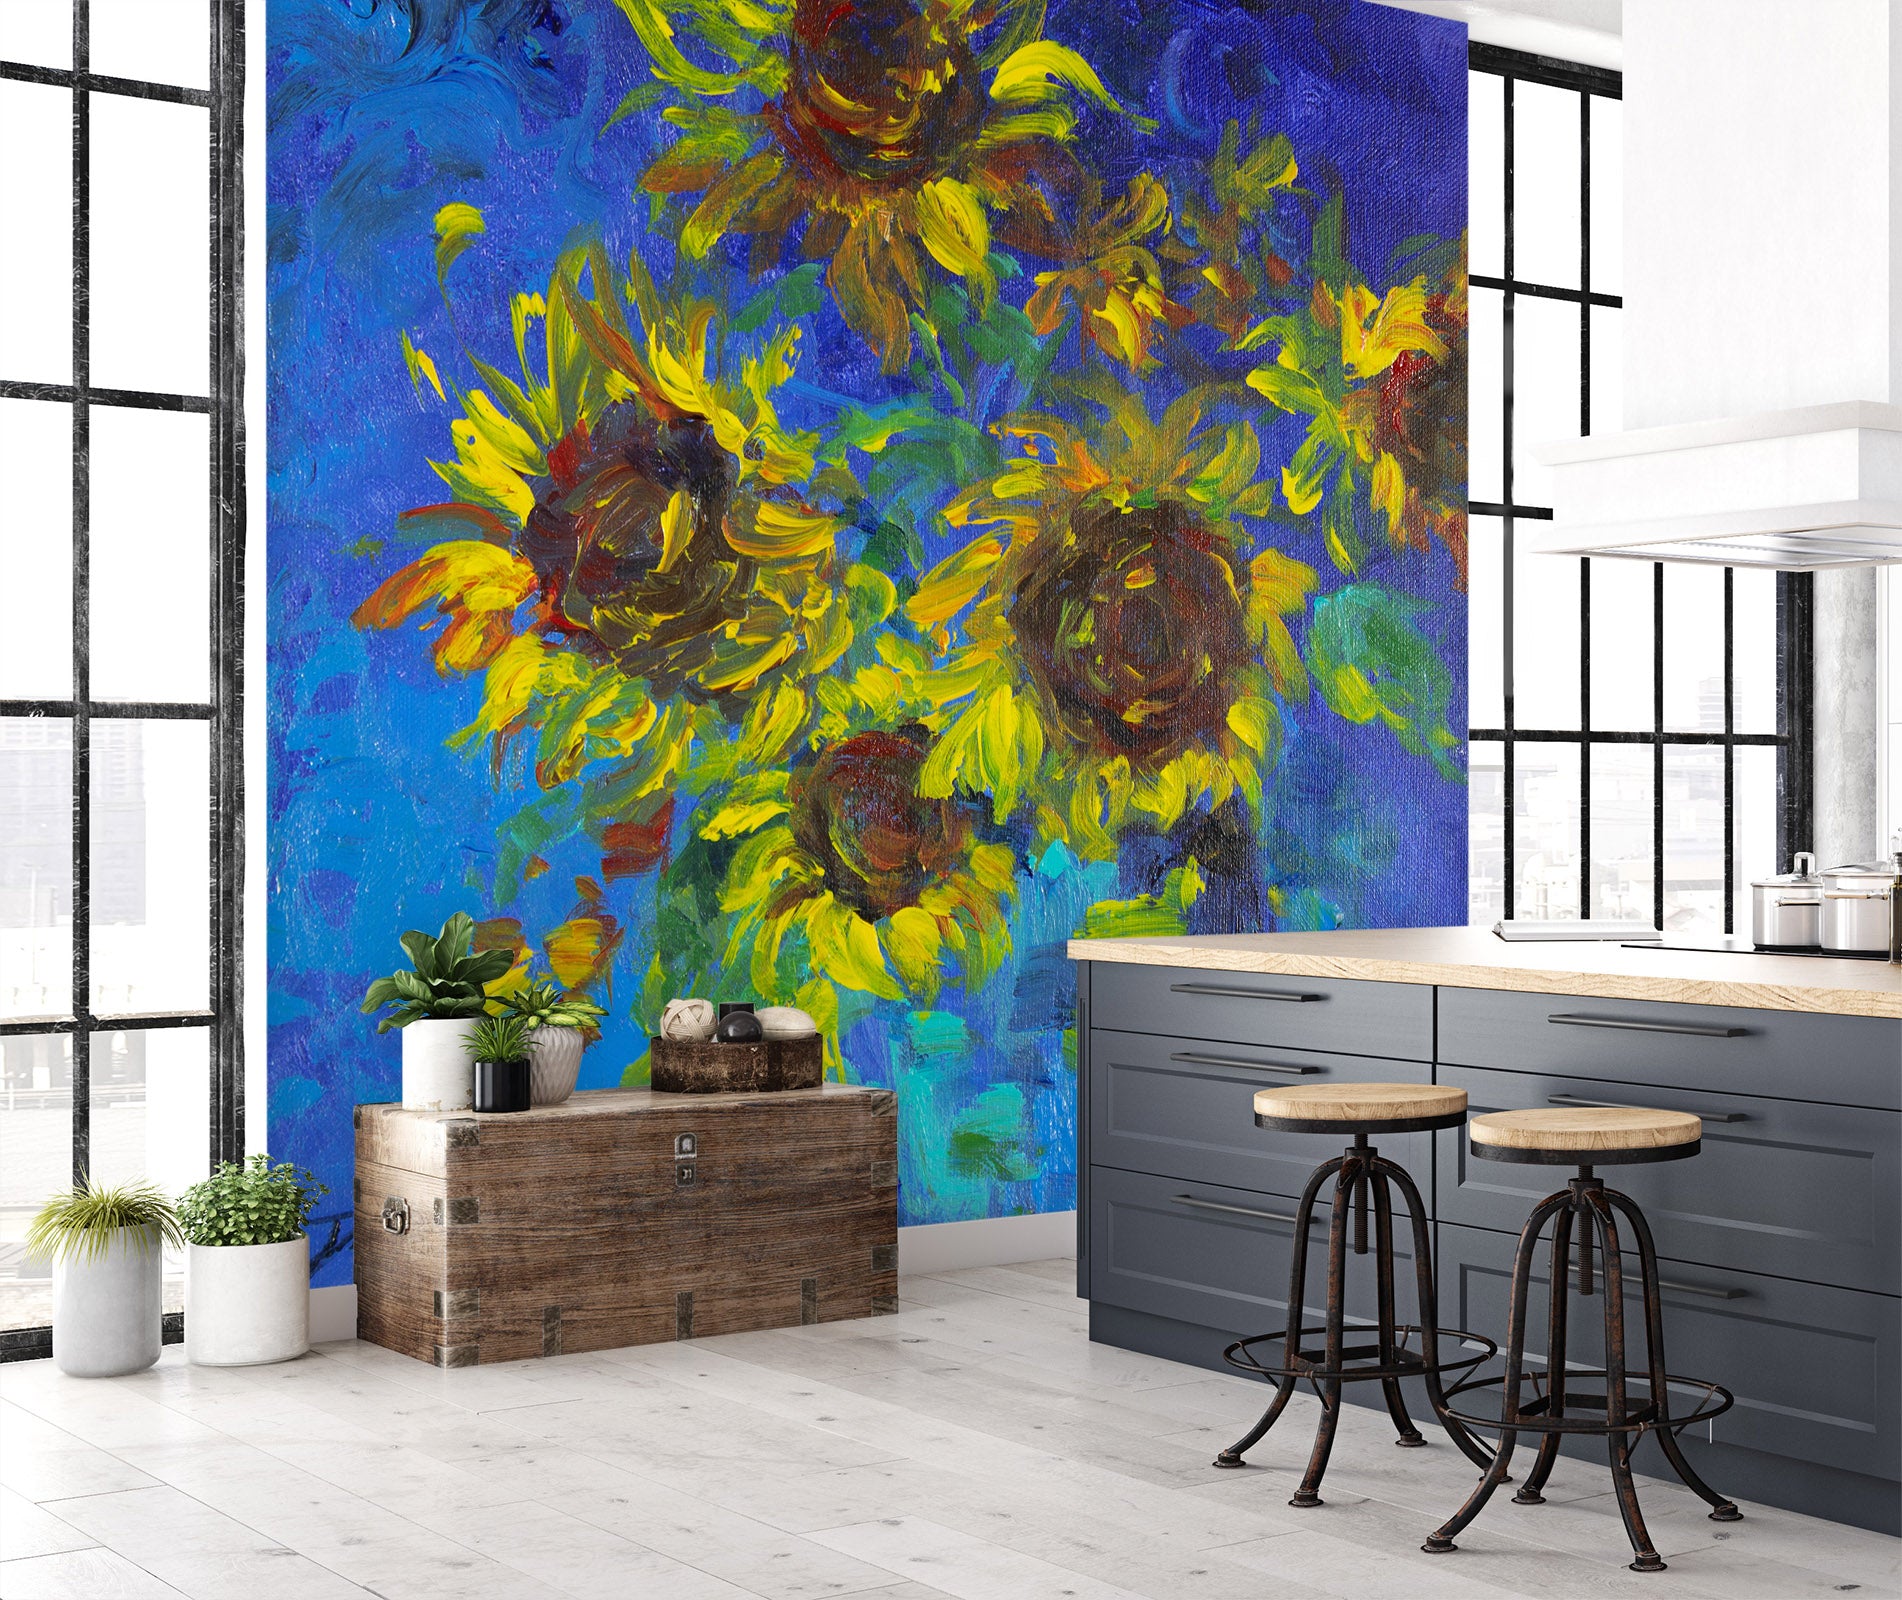 3D Painting Sunflower Vase 3120 Debi Coules Wall Mural Wall Murals